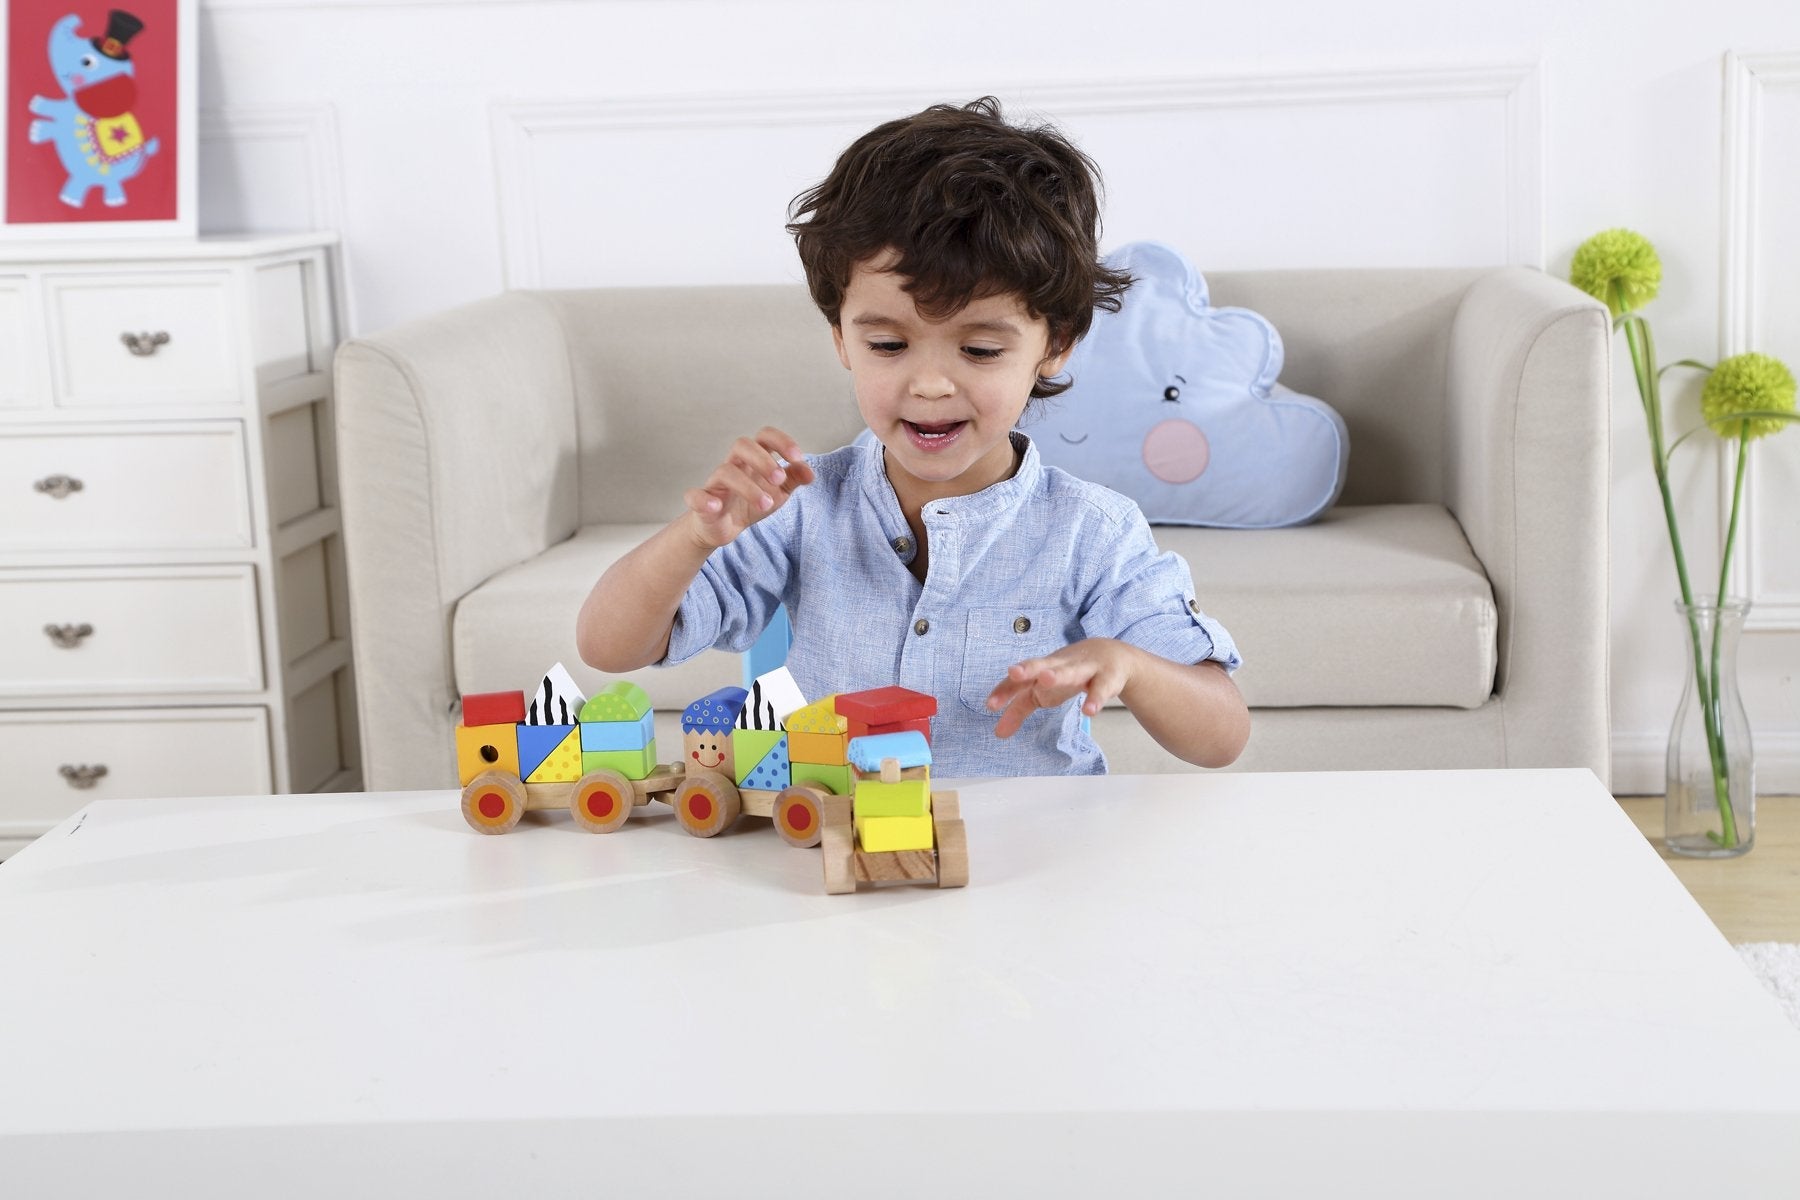 toys for infant Wooden Stacking Train